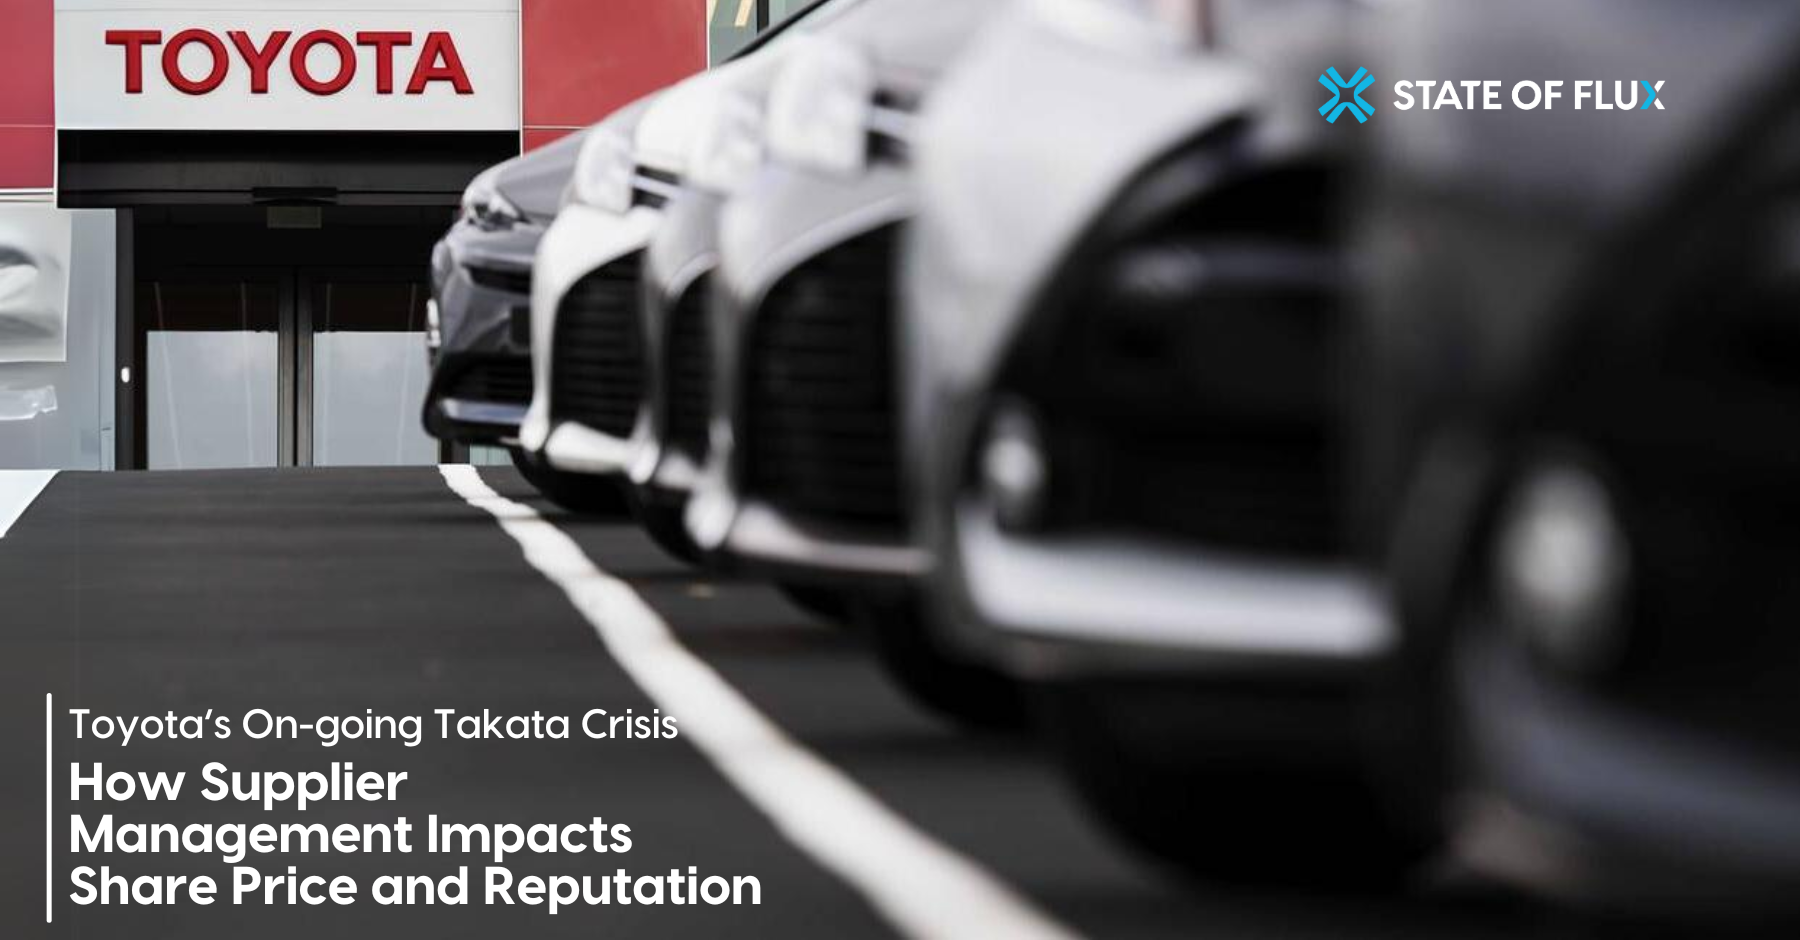 Toyota’s Takata Crisis: How Supplier Management Impacts Share Price and Reputation